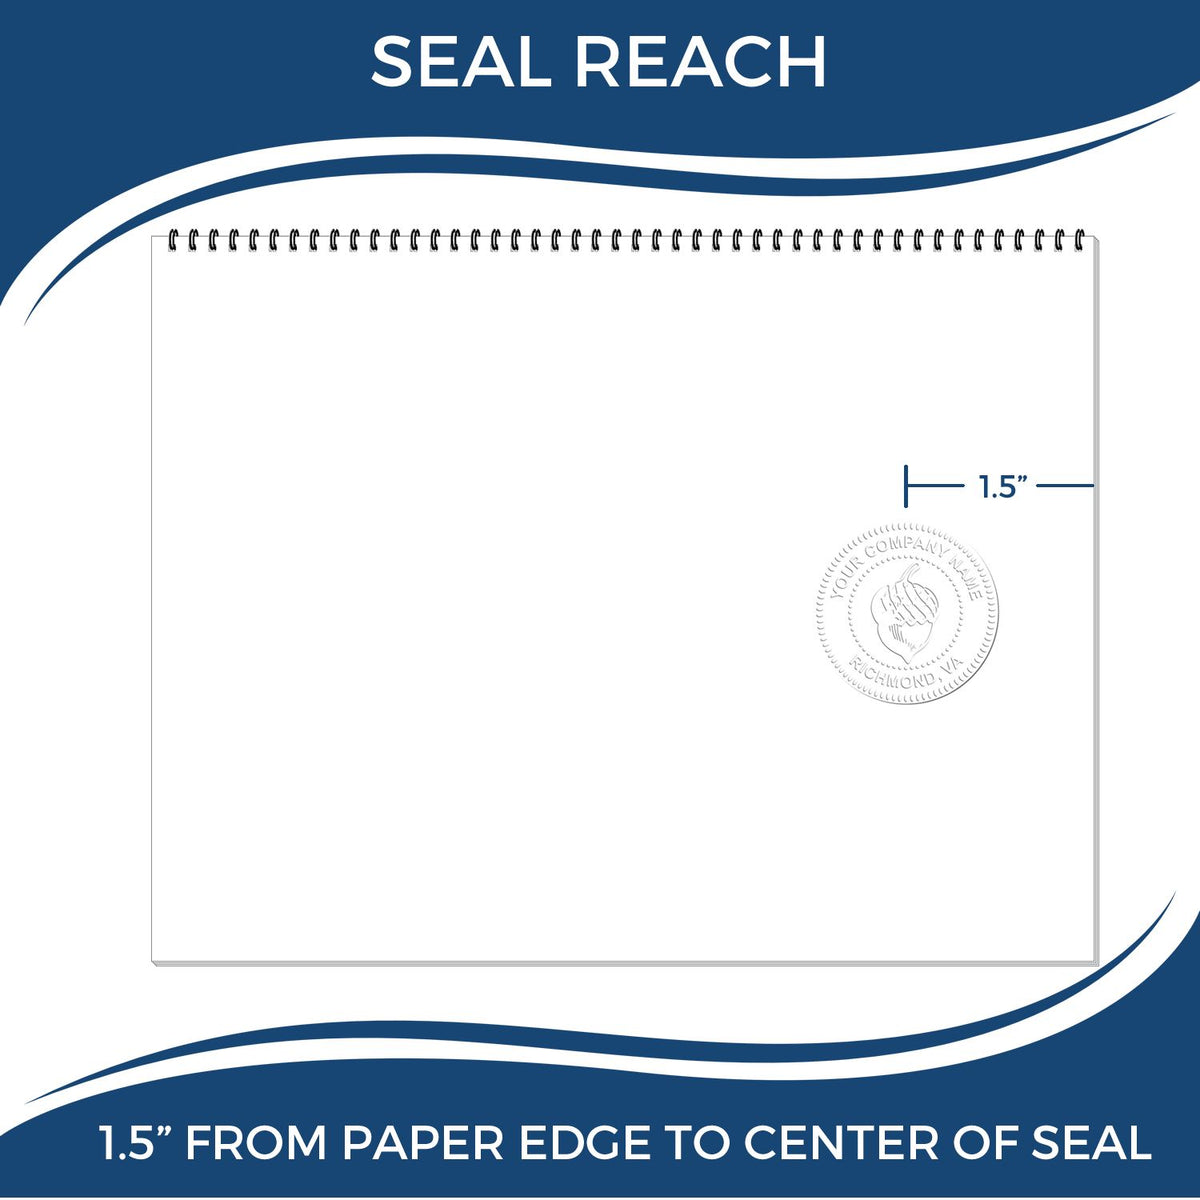 An infographic showing the seal reach which is represented by a ruler and a miniature seal image of the Mississippi Geologist Desk Seal